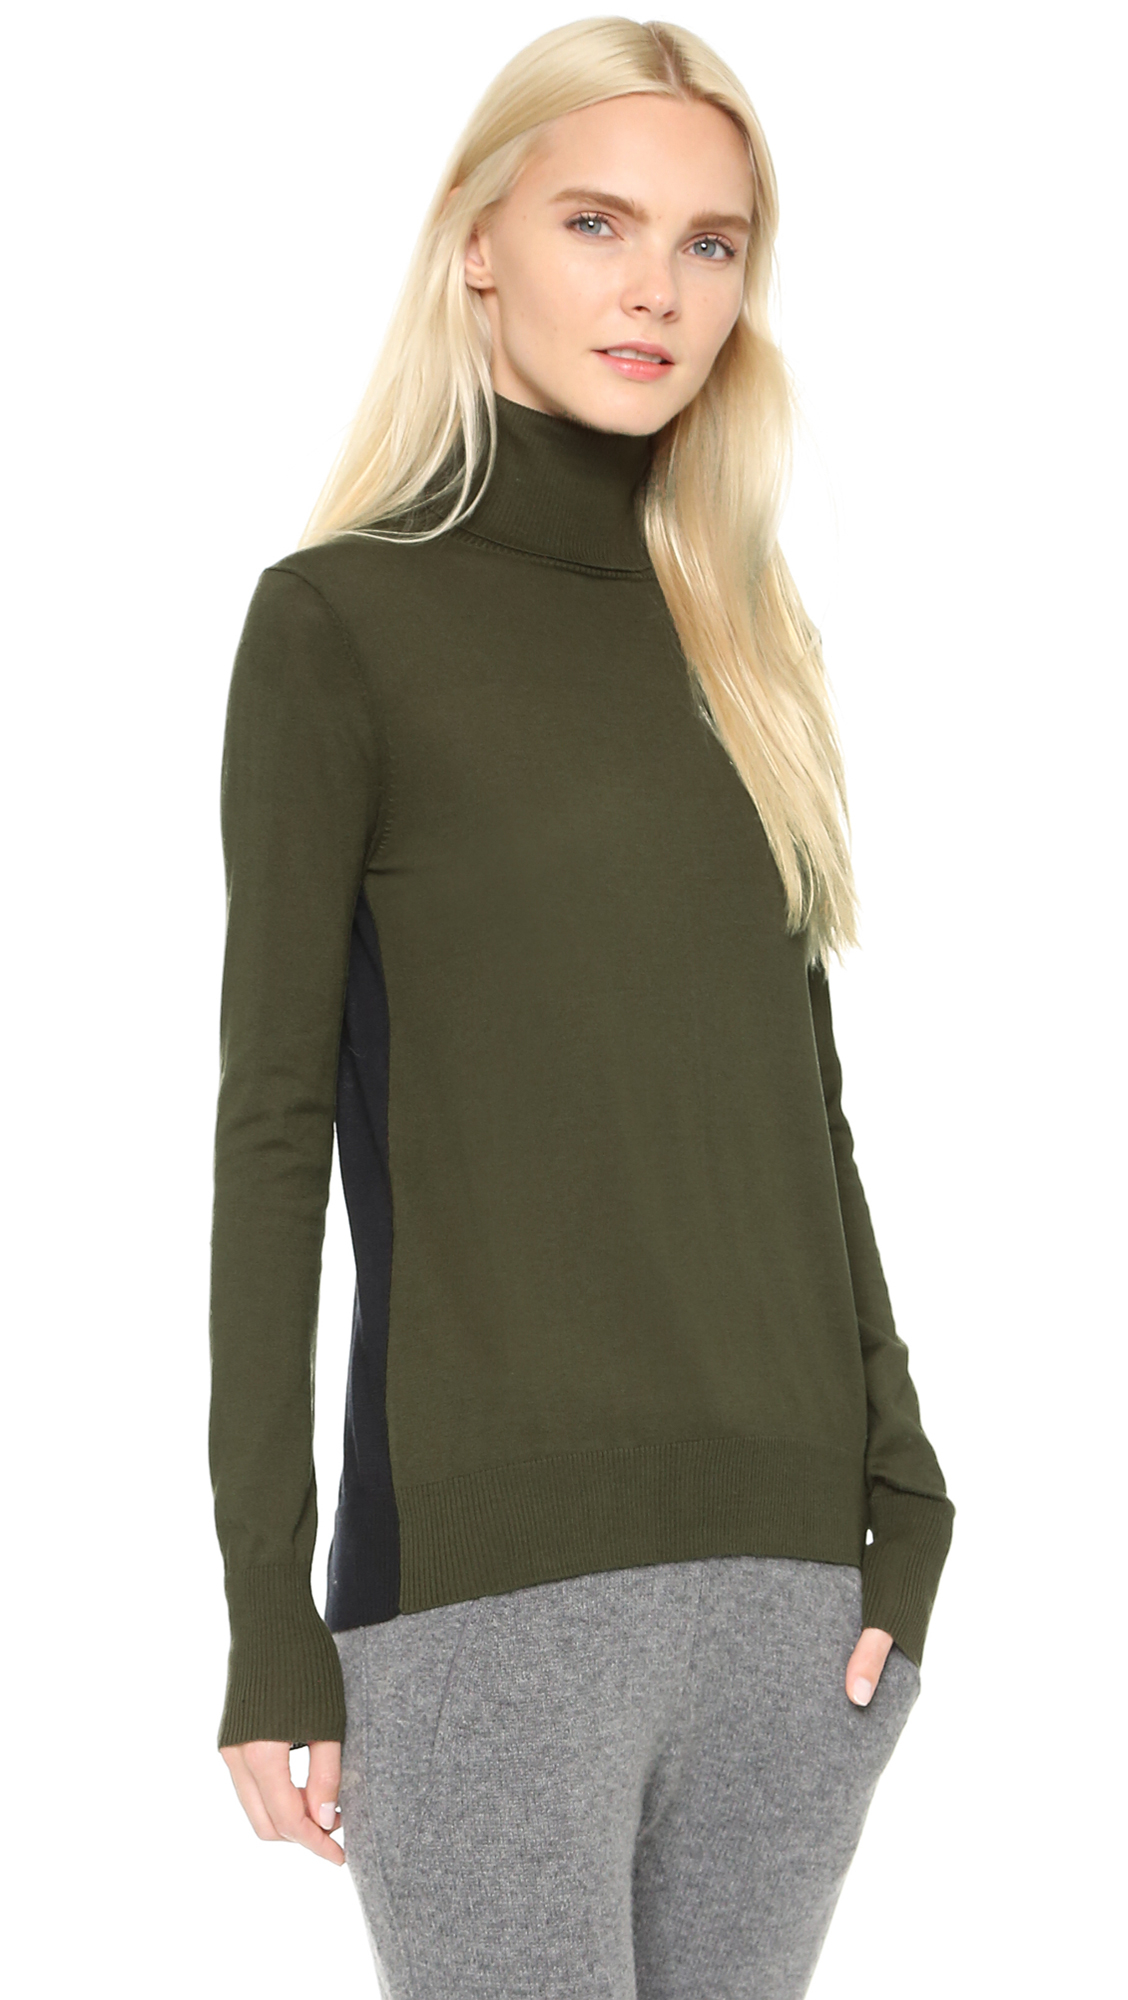 M.patmos Onelli Turtleneck Sweater - Olive/black in Green | Lyst